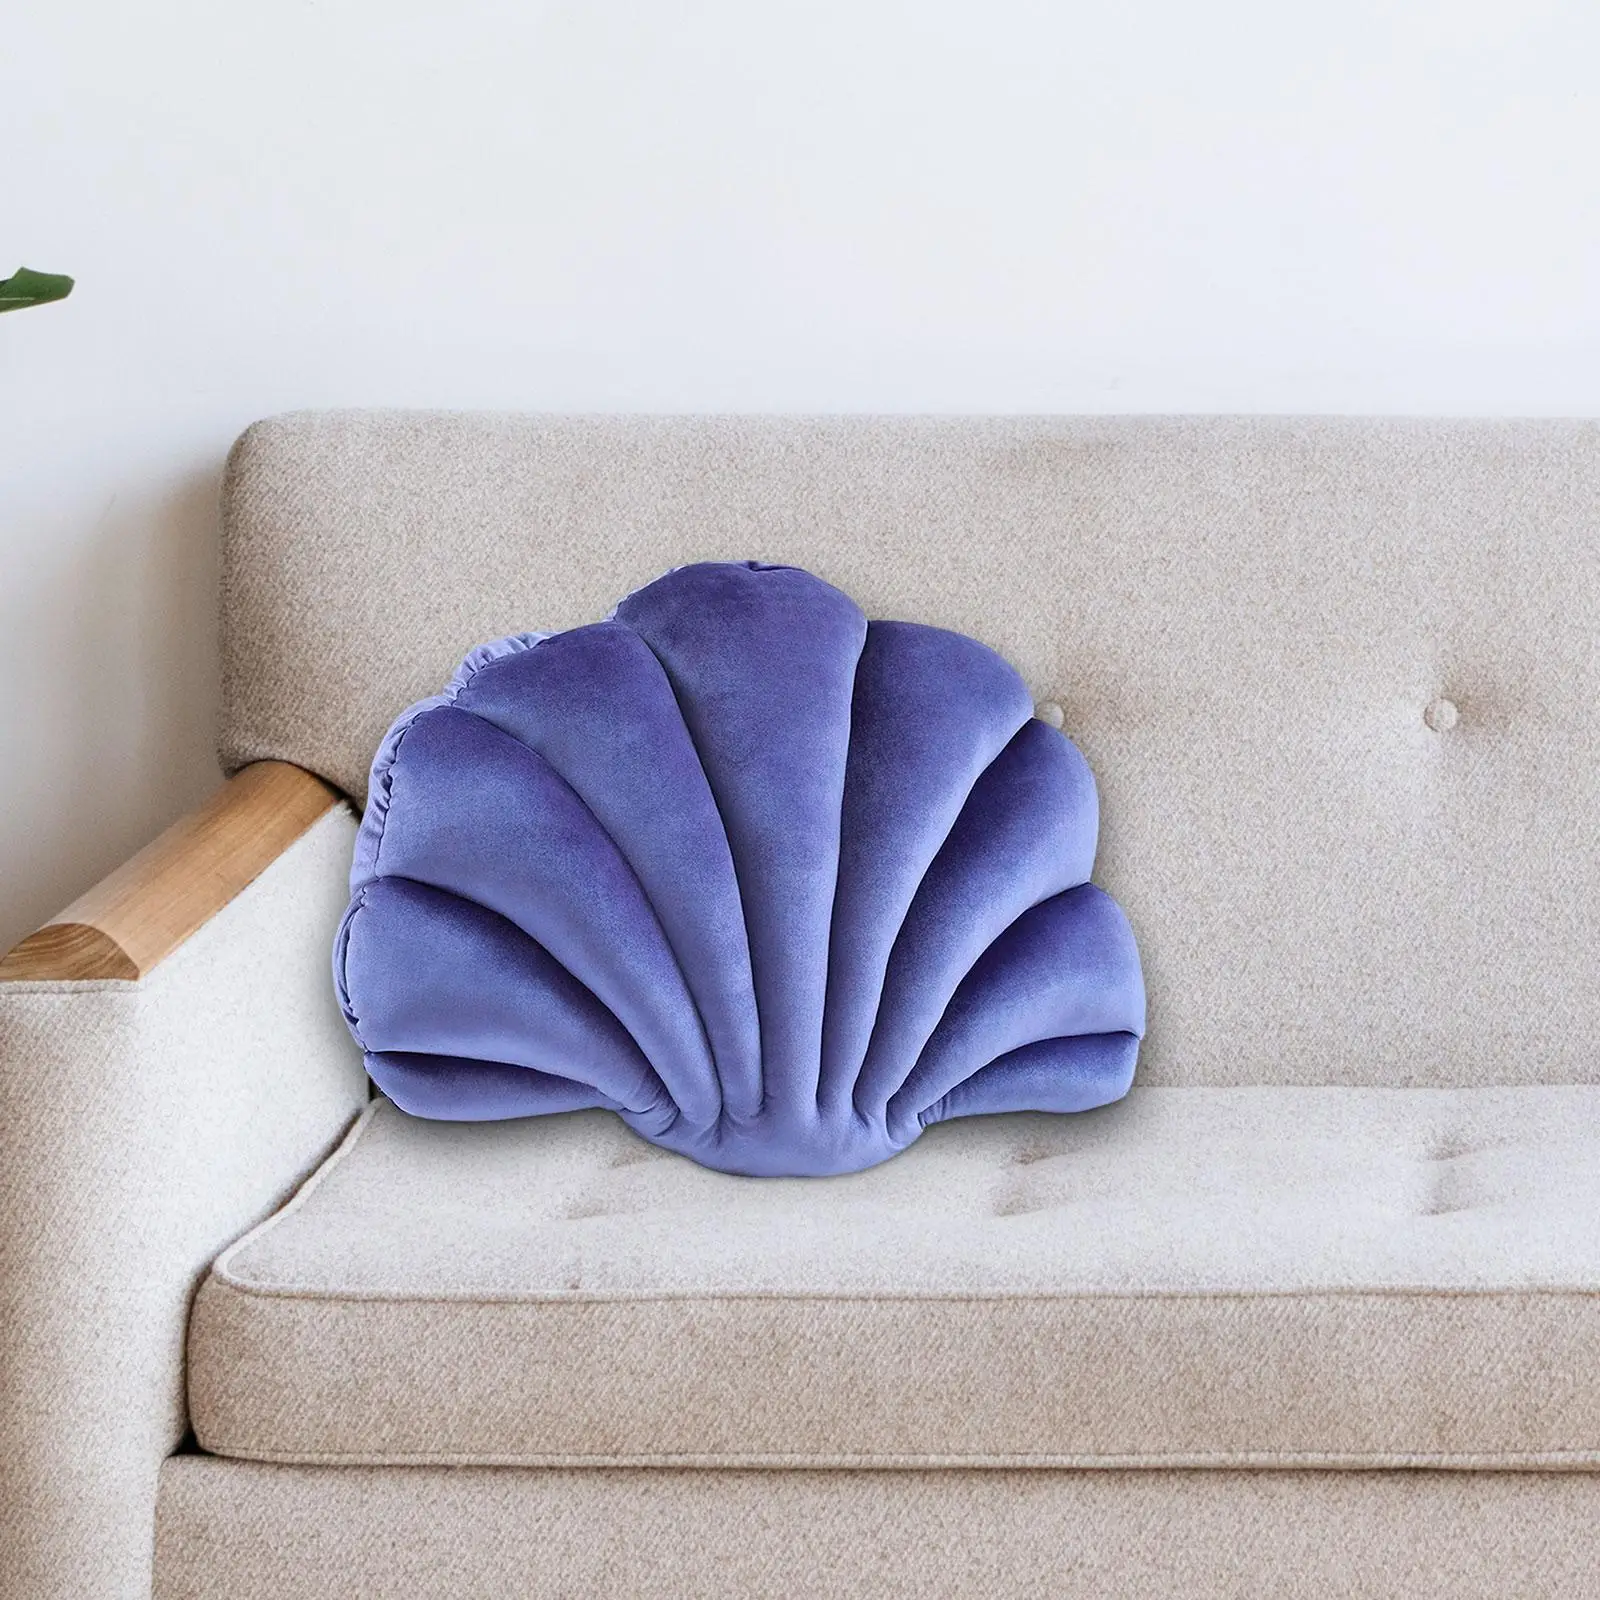 Seashell Decorative Pillow shell Pillow Cute Throw Pillow Ornament Wear Resistant for Couch Bed Size 34cmx25cm Firm Stuffed